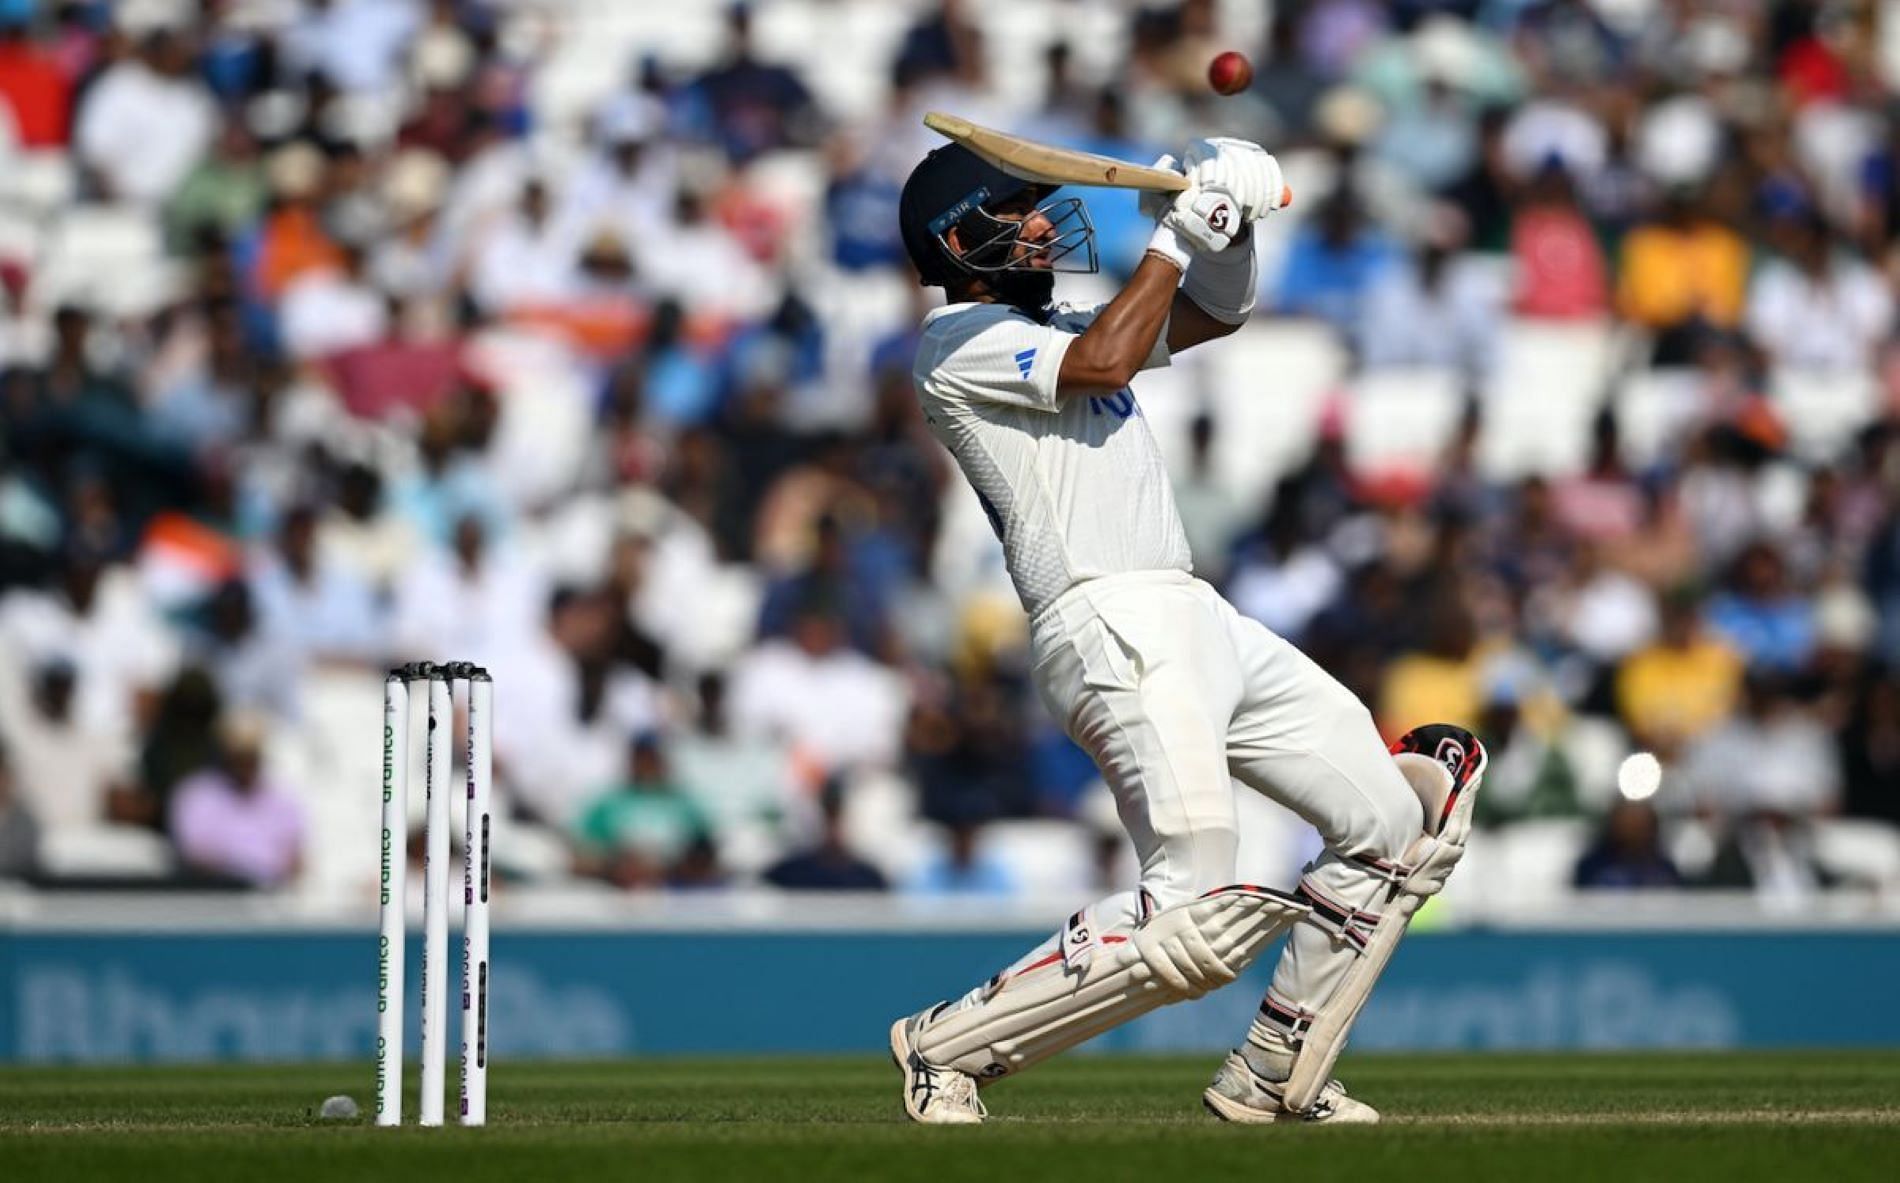 Pujara attempted an uncharacteristic ramp shot to lose his wicket on day 4 of the WTC final